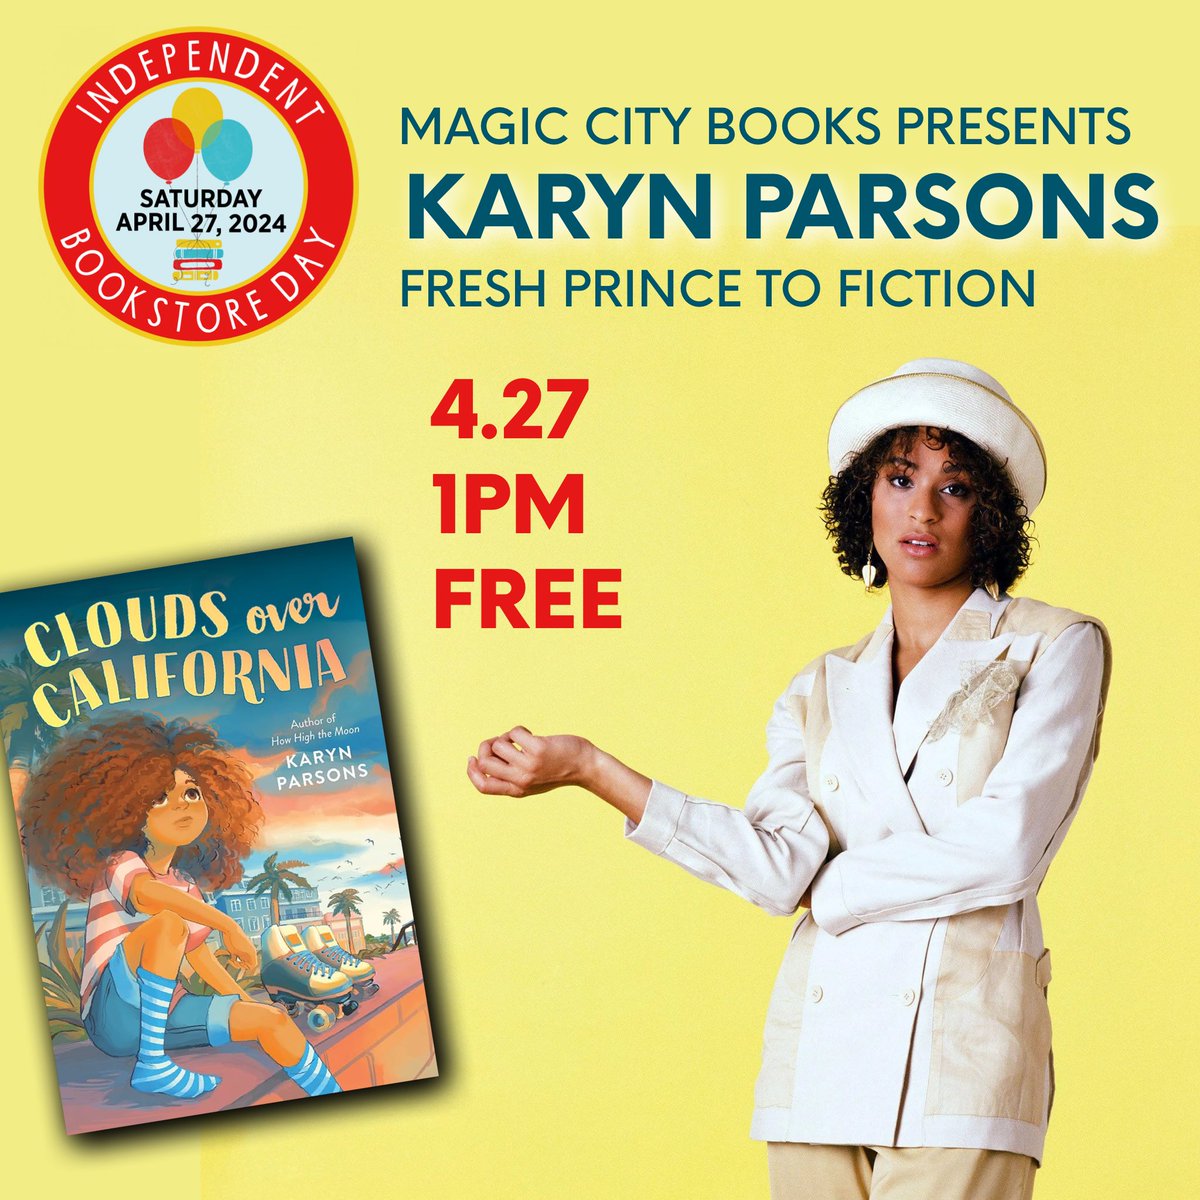 You should like totally come to this Saturday afternoon! Meet @Karyn_Parsons at 1pm. Bring the kids. Celebrate @BookstoreDay with MCB! Free and open to all.